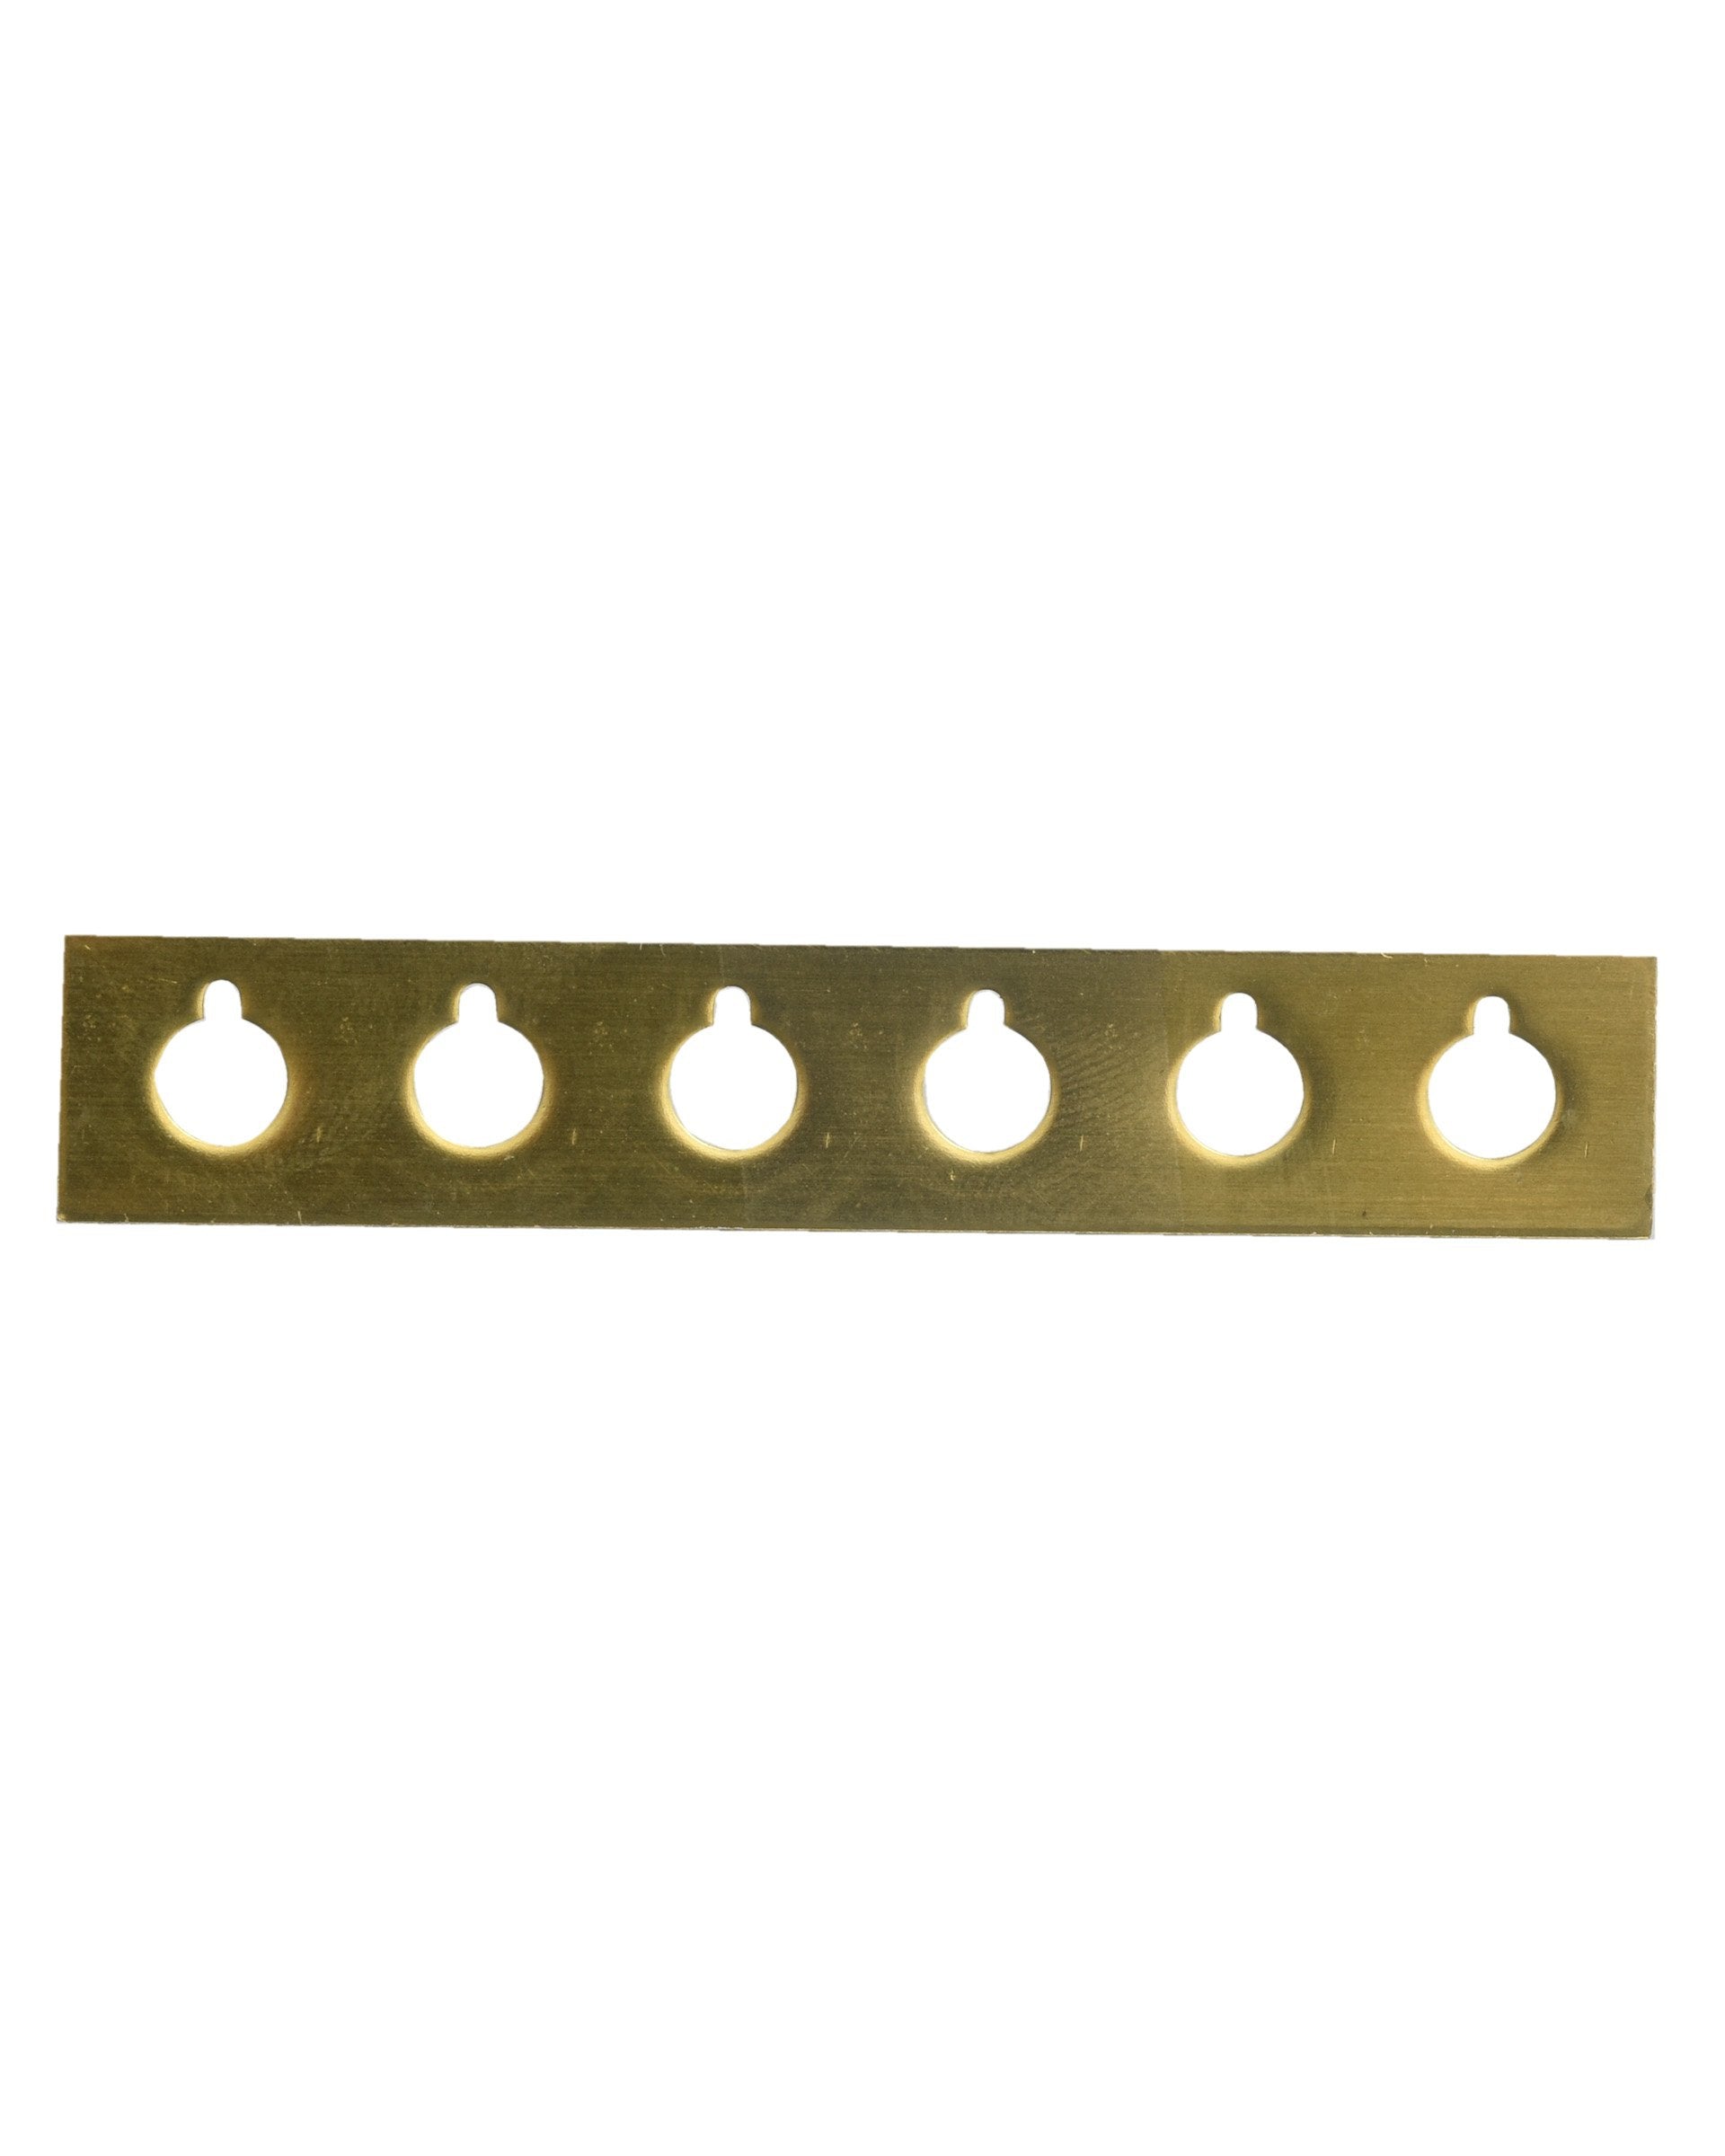 Image 1 of Mitchel's Acoustic Guitar "Plate Mate" 2 3/8" Spacing - SKU# PM100-2-3/8 : Product Type Accessories & Parts : Elderly Instruments